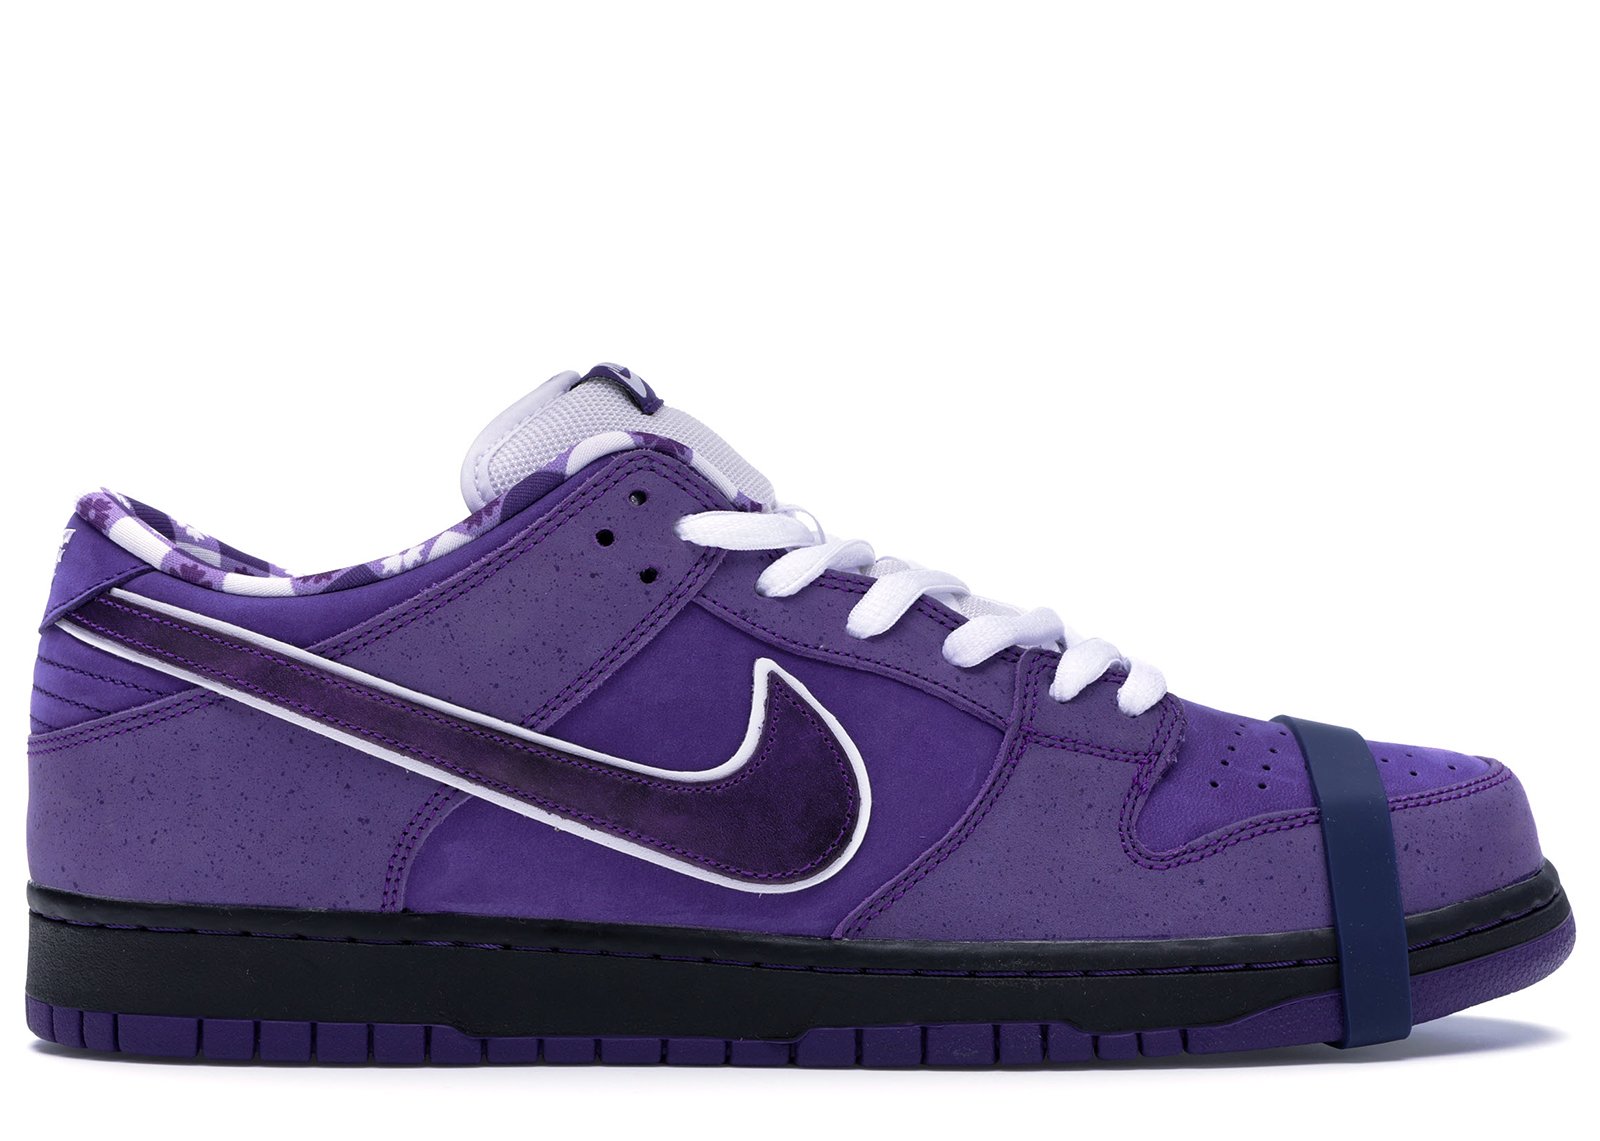 Nike SB Dunk Low Concepts Purple Lobster sneakers